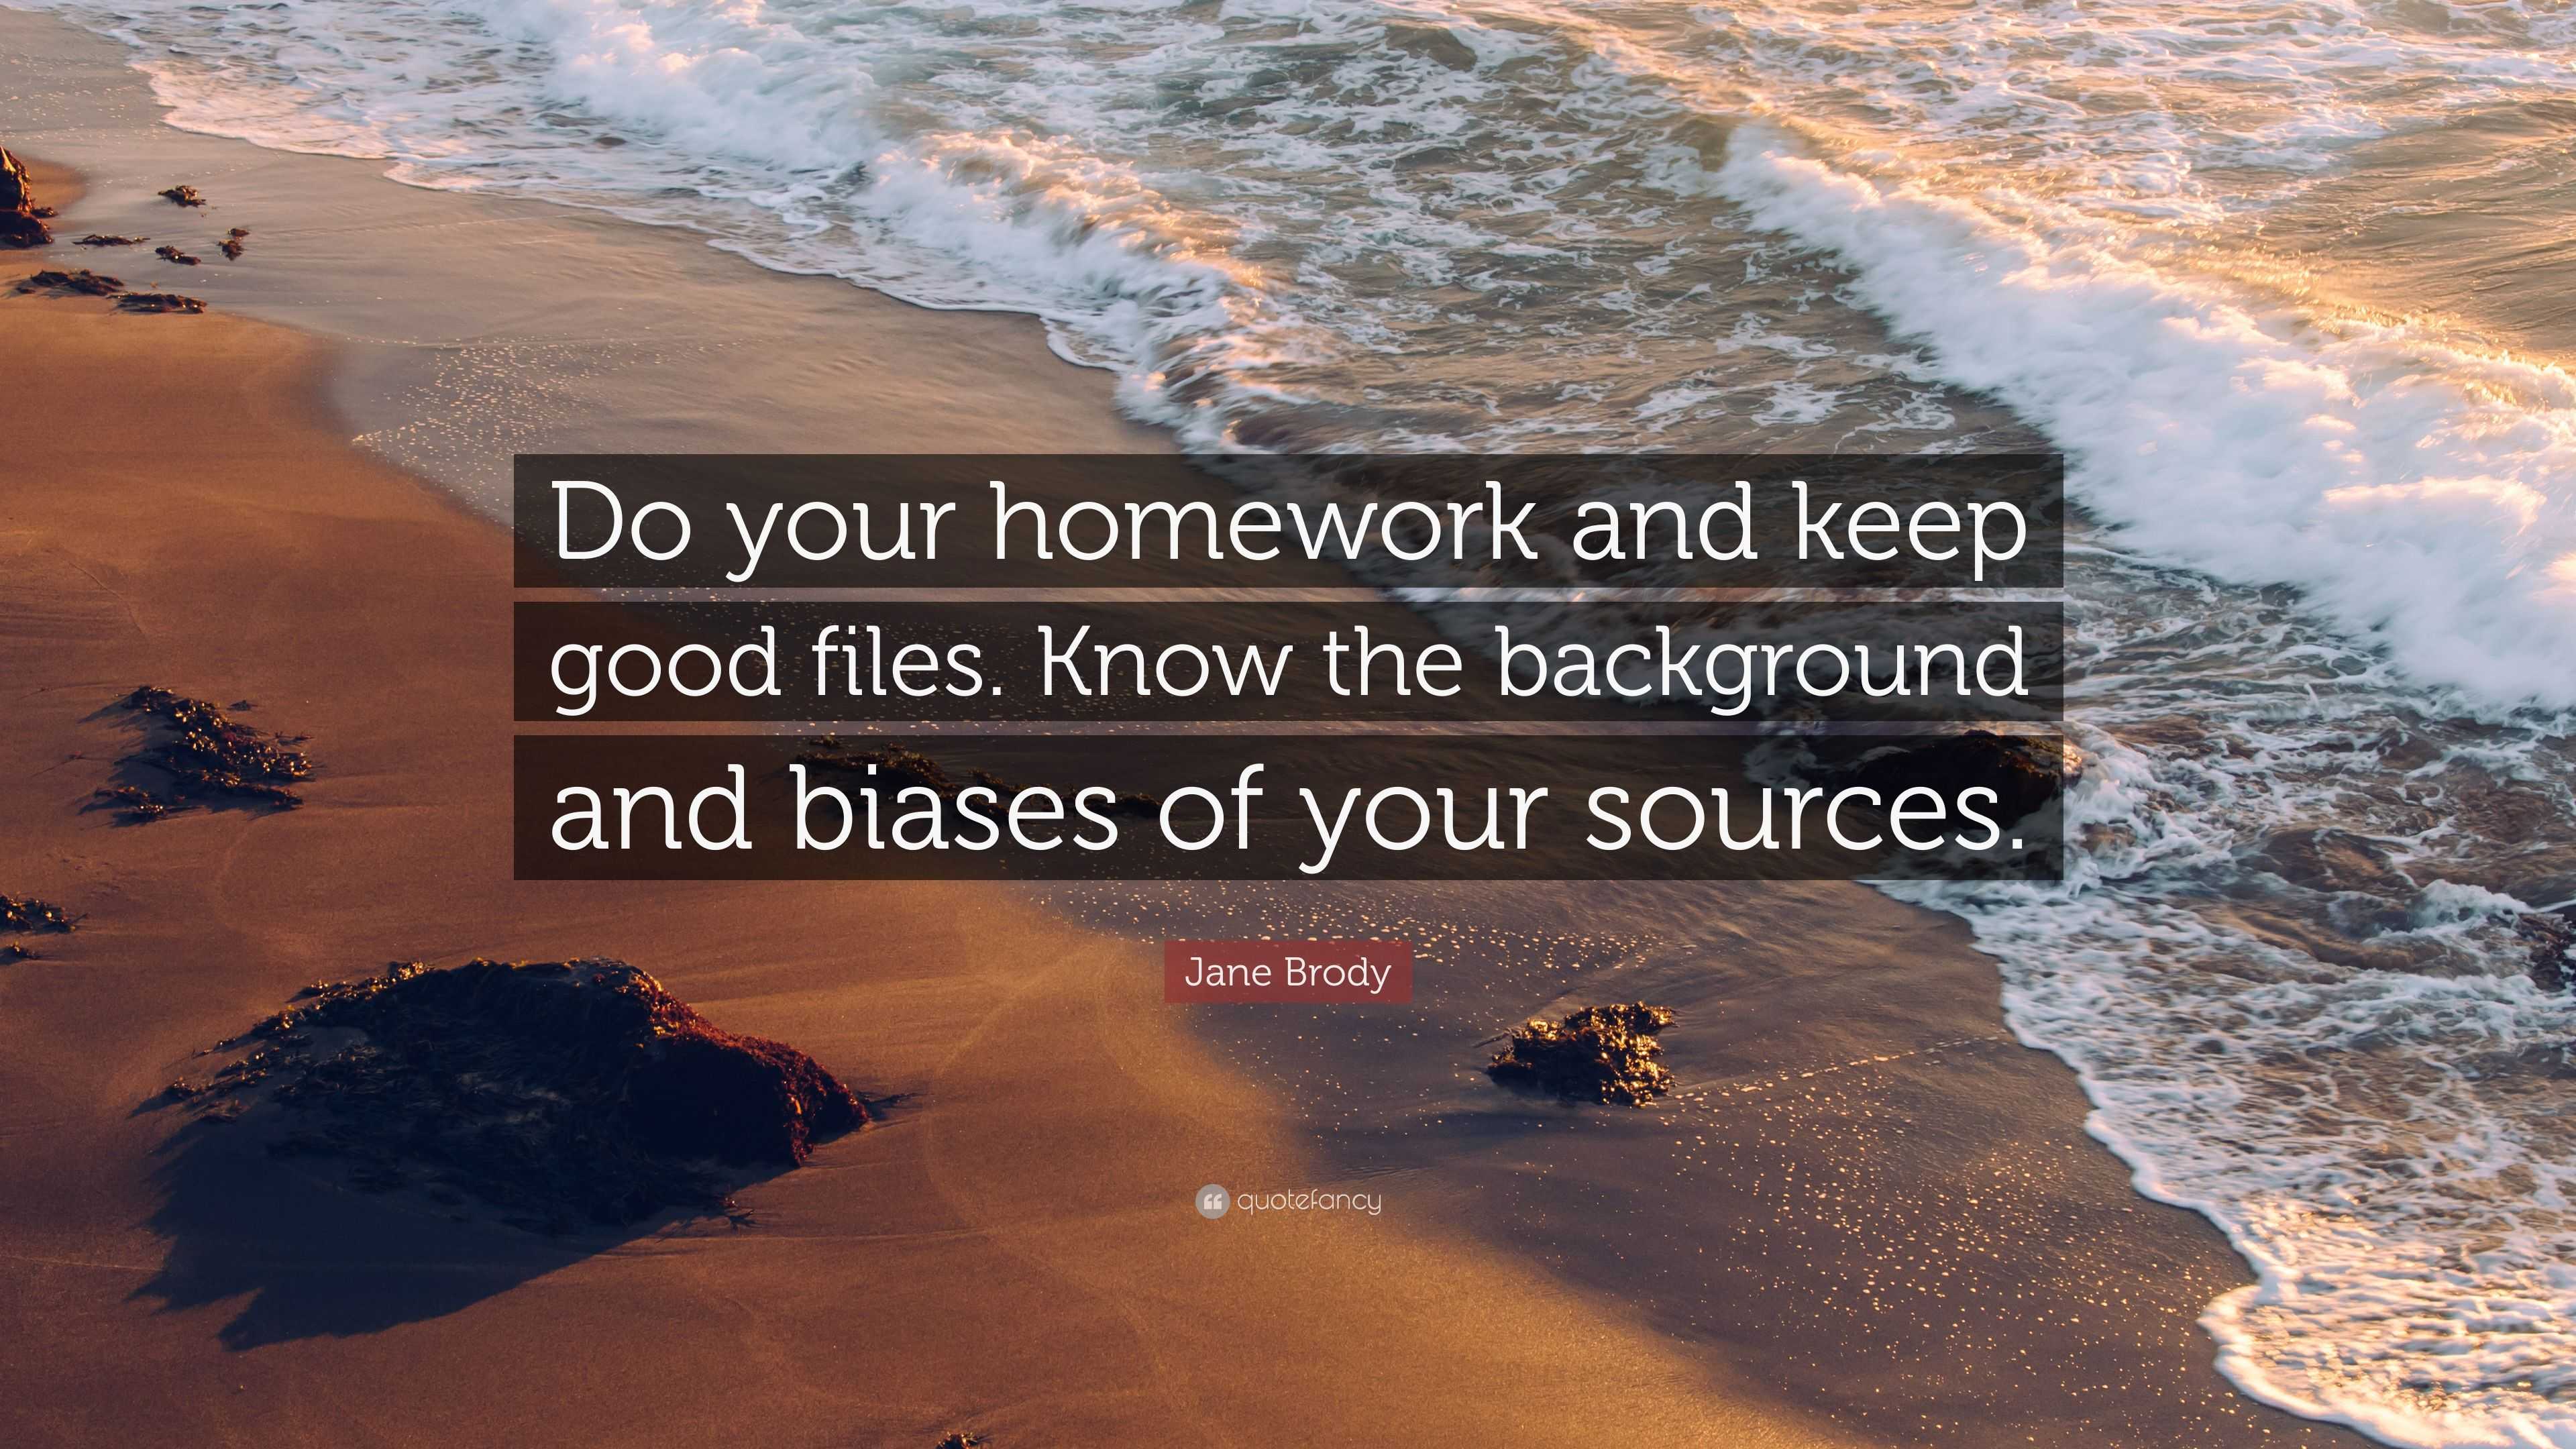 quote about homework being good